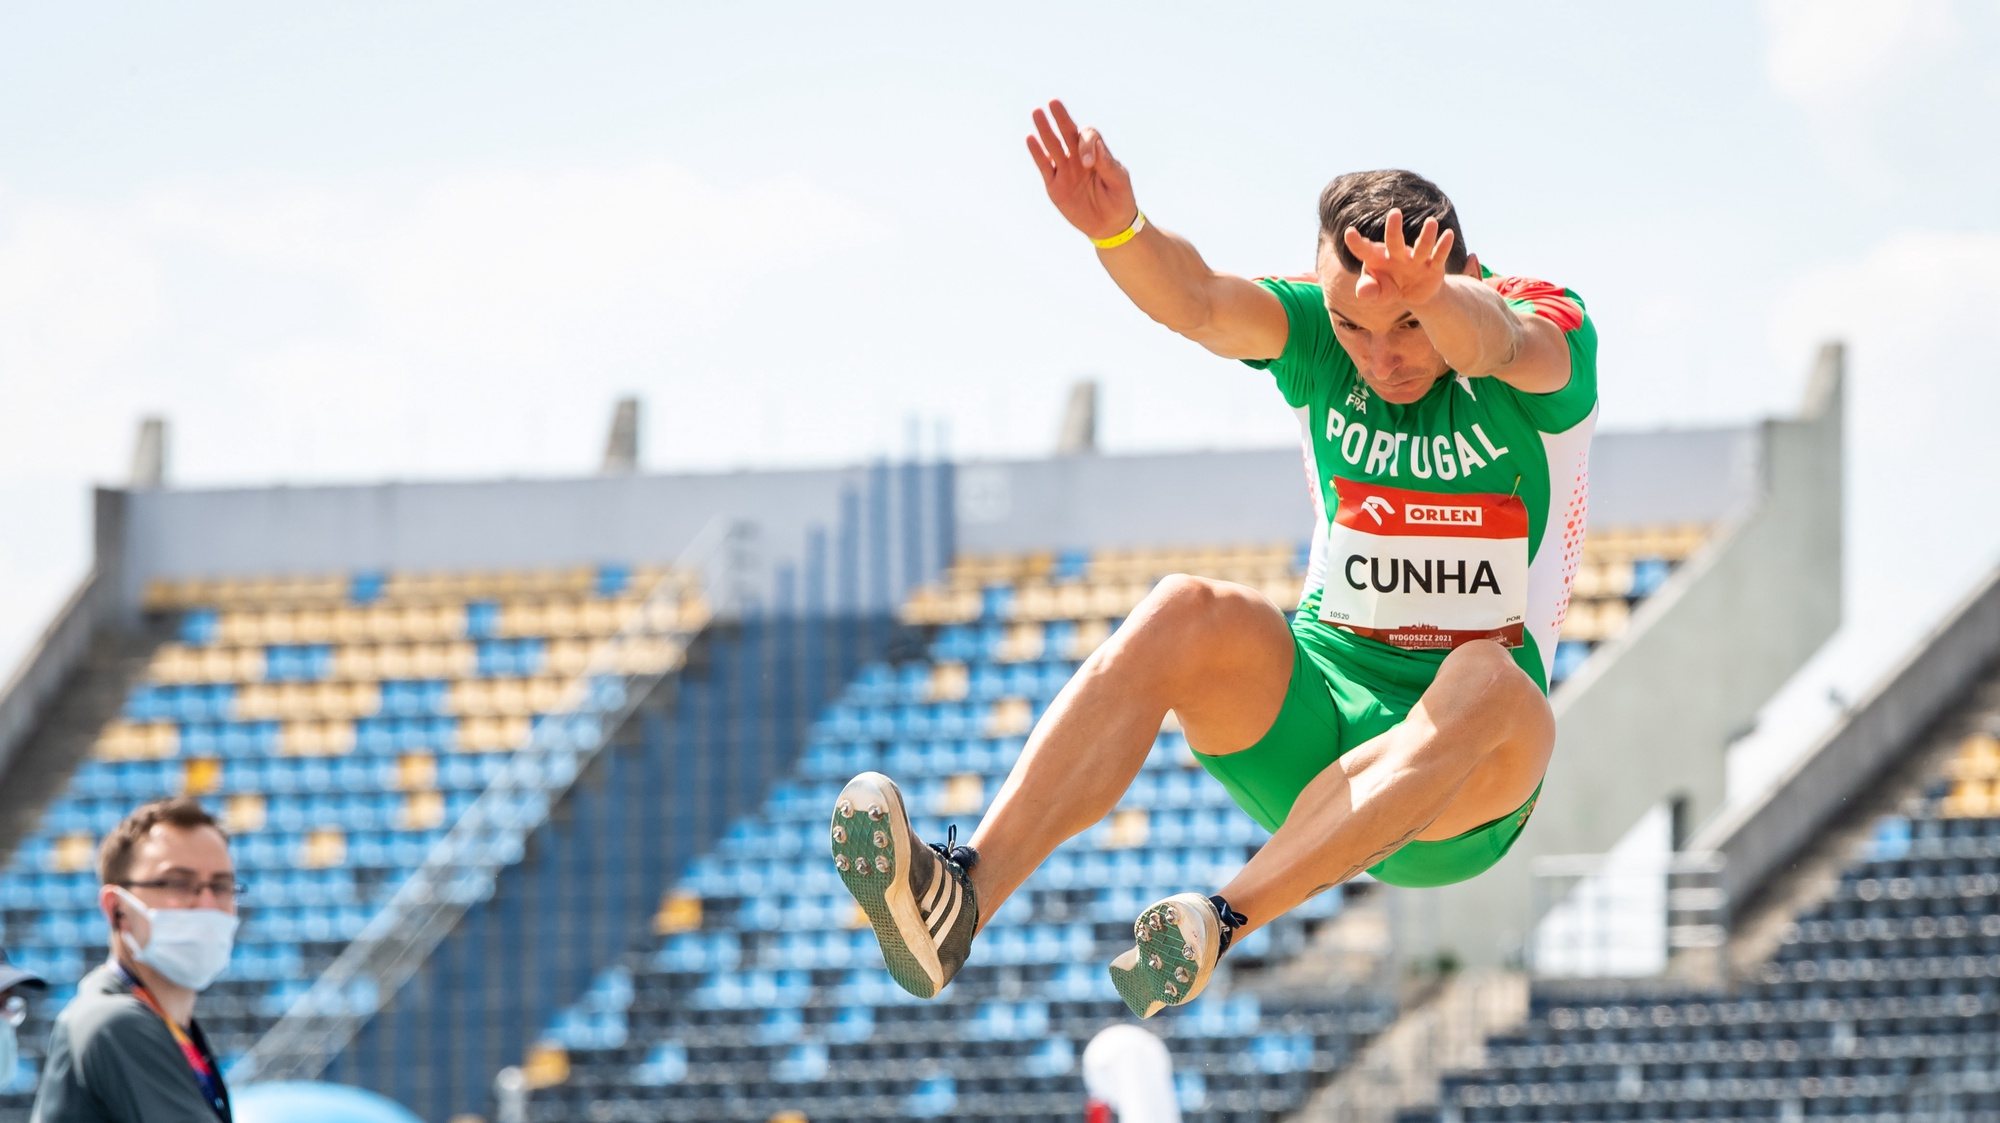 epa09248676 Lenine Cunha of the Portugal in action during the Men&#039;s Long Jump T20 Final at the European Para Athletics Championships in Bydgoszcz, northern Poland, 04 June 2021.  EPA/Tytus Zmijewski POLAND OUT